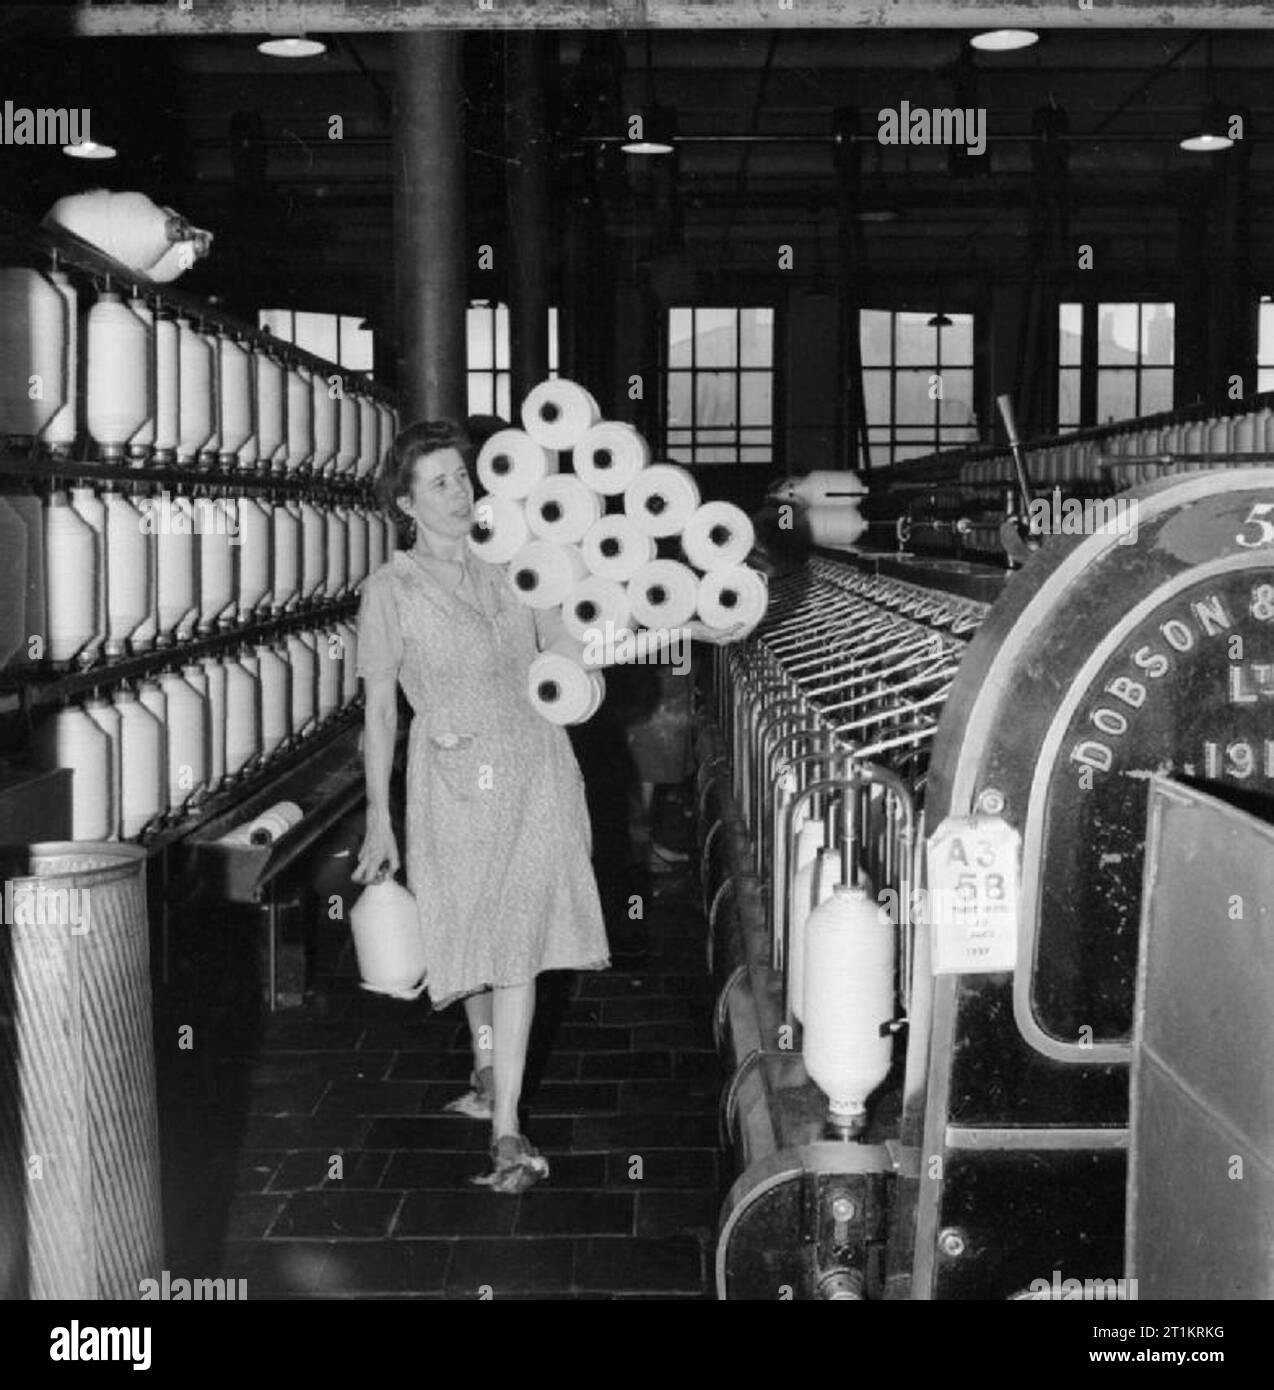 The British Cotton Industry- Everyday Life at a British Cotton Mill, Lancashire, England, UK, 1945 Cotton worker Mrs Bannister carries 14 large bobbins (13 in one arm and 1 in the other hand!) from the 'intermediate to the roving frames' at a cotton mill, somewhere in Lancashire. Stock Photo